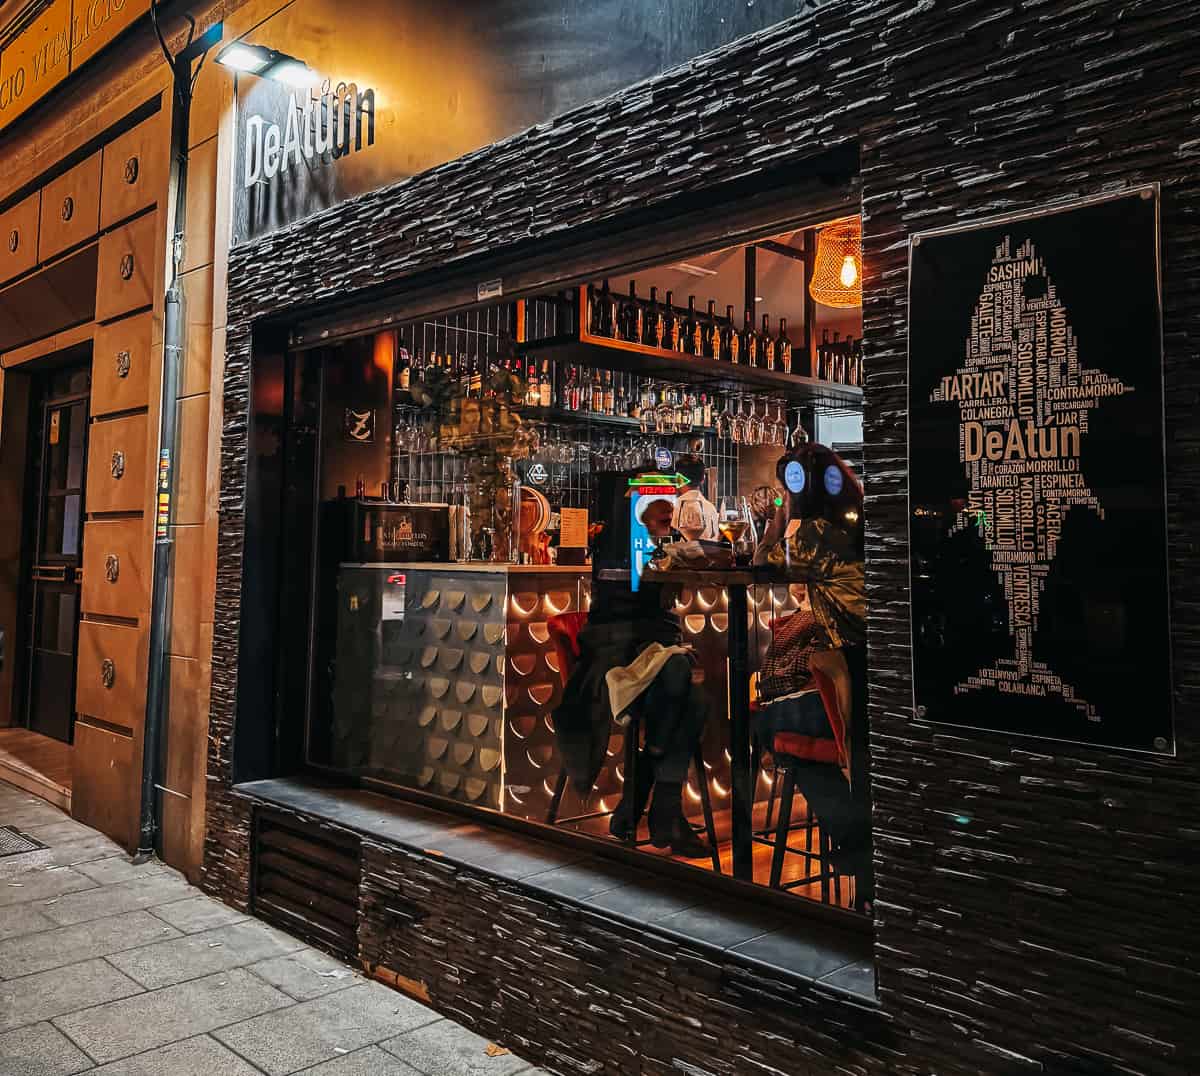 A stylish tapas bar with stone walls and a sign that reads 